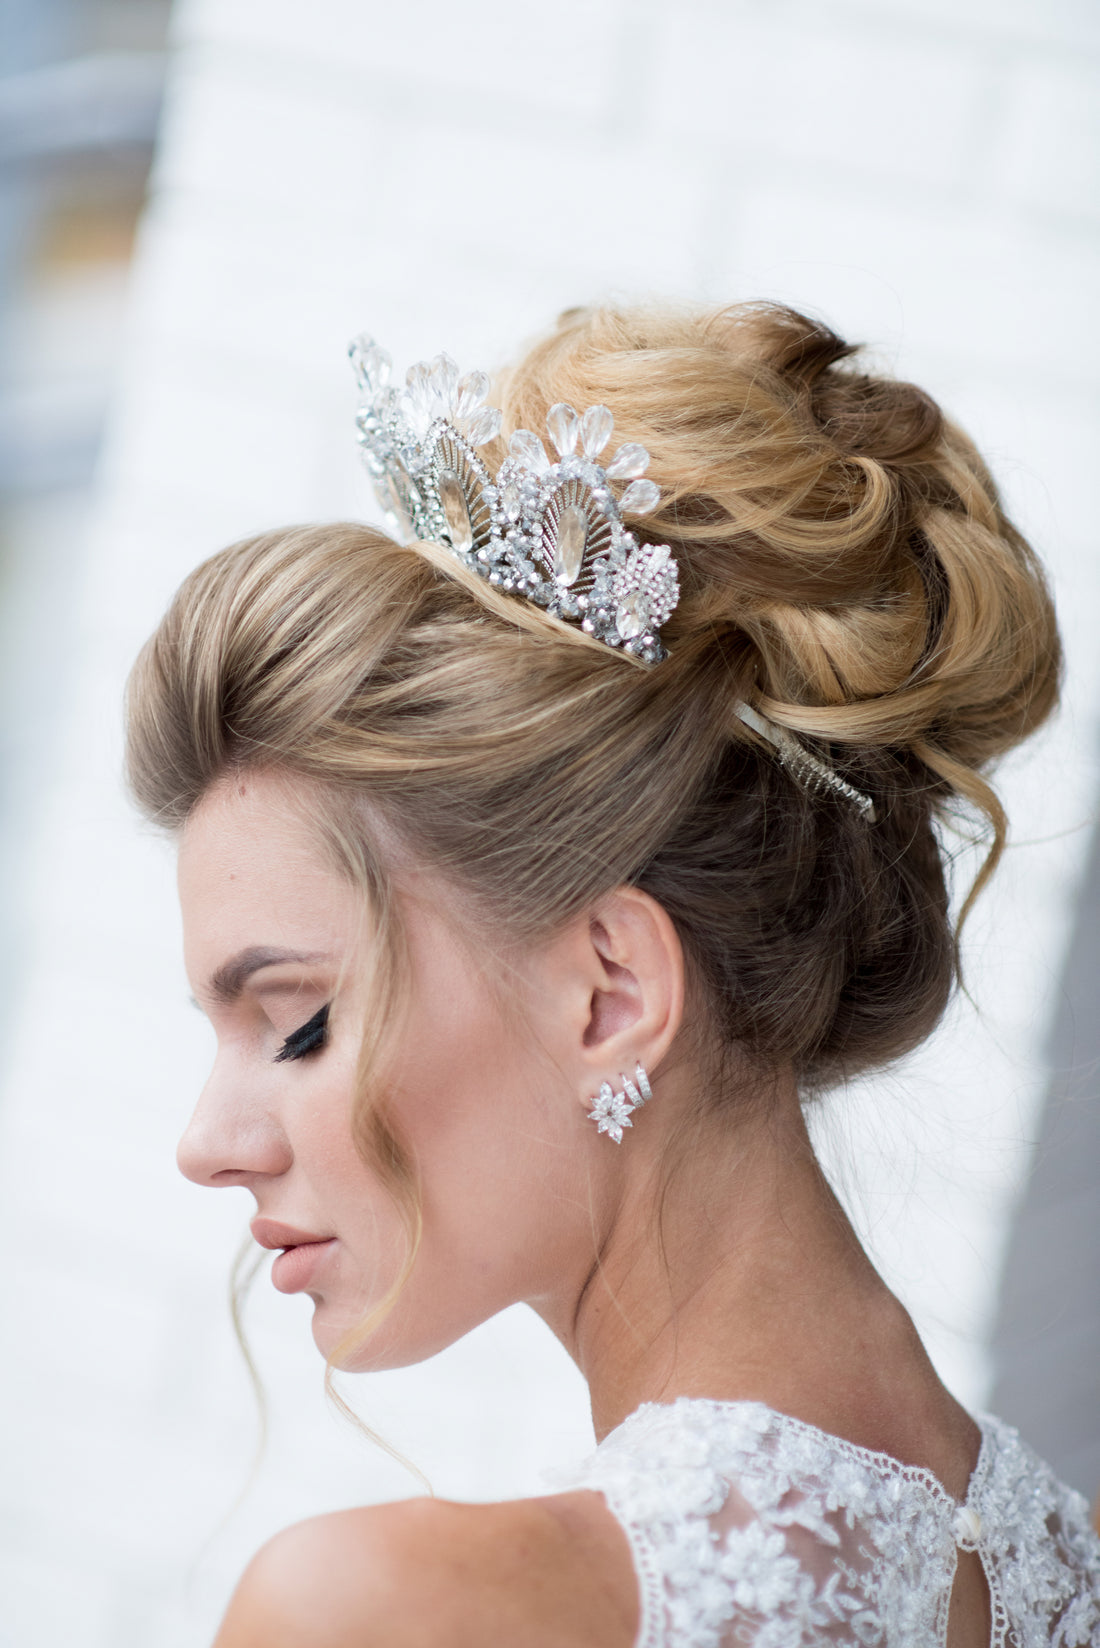 Bridal Hair Extensions: Ideas and Inspiration for Wedding Hairstyles